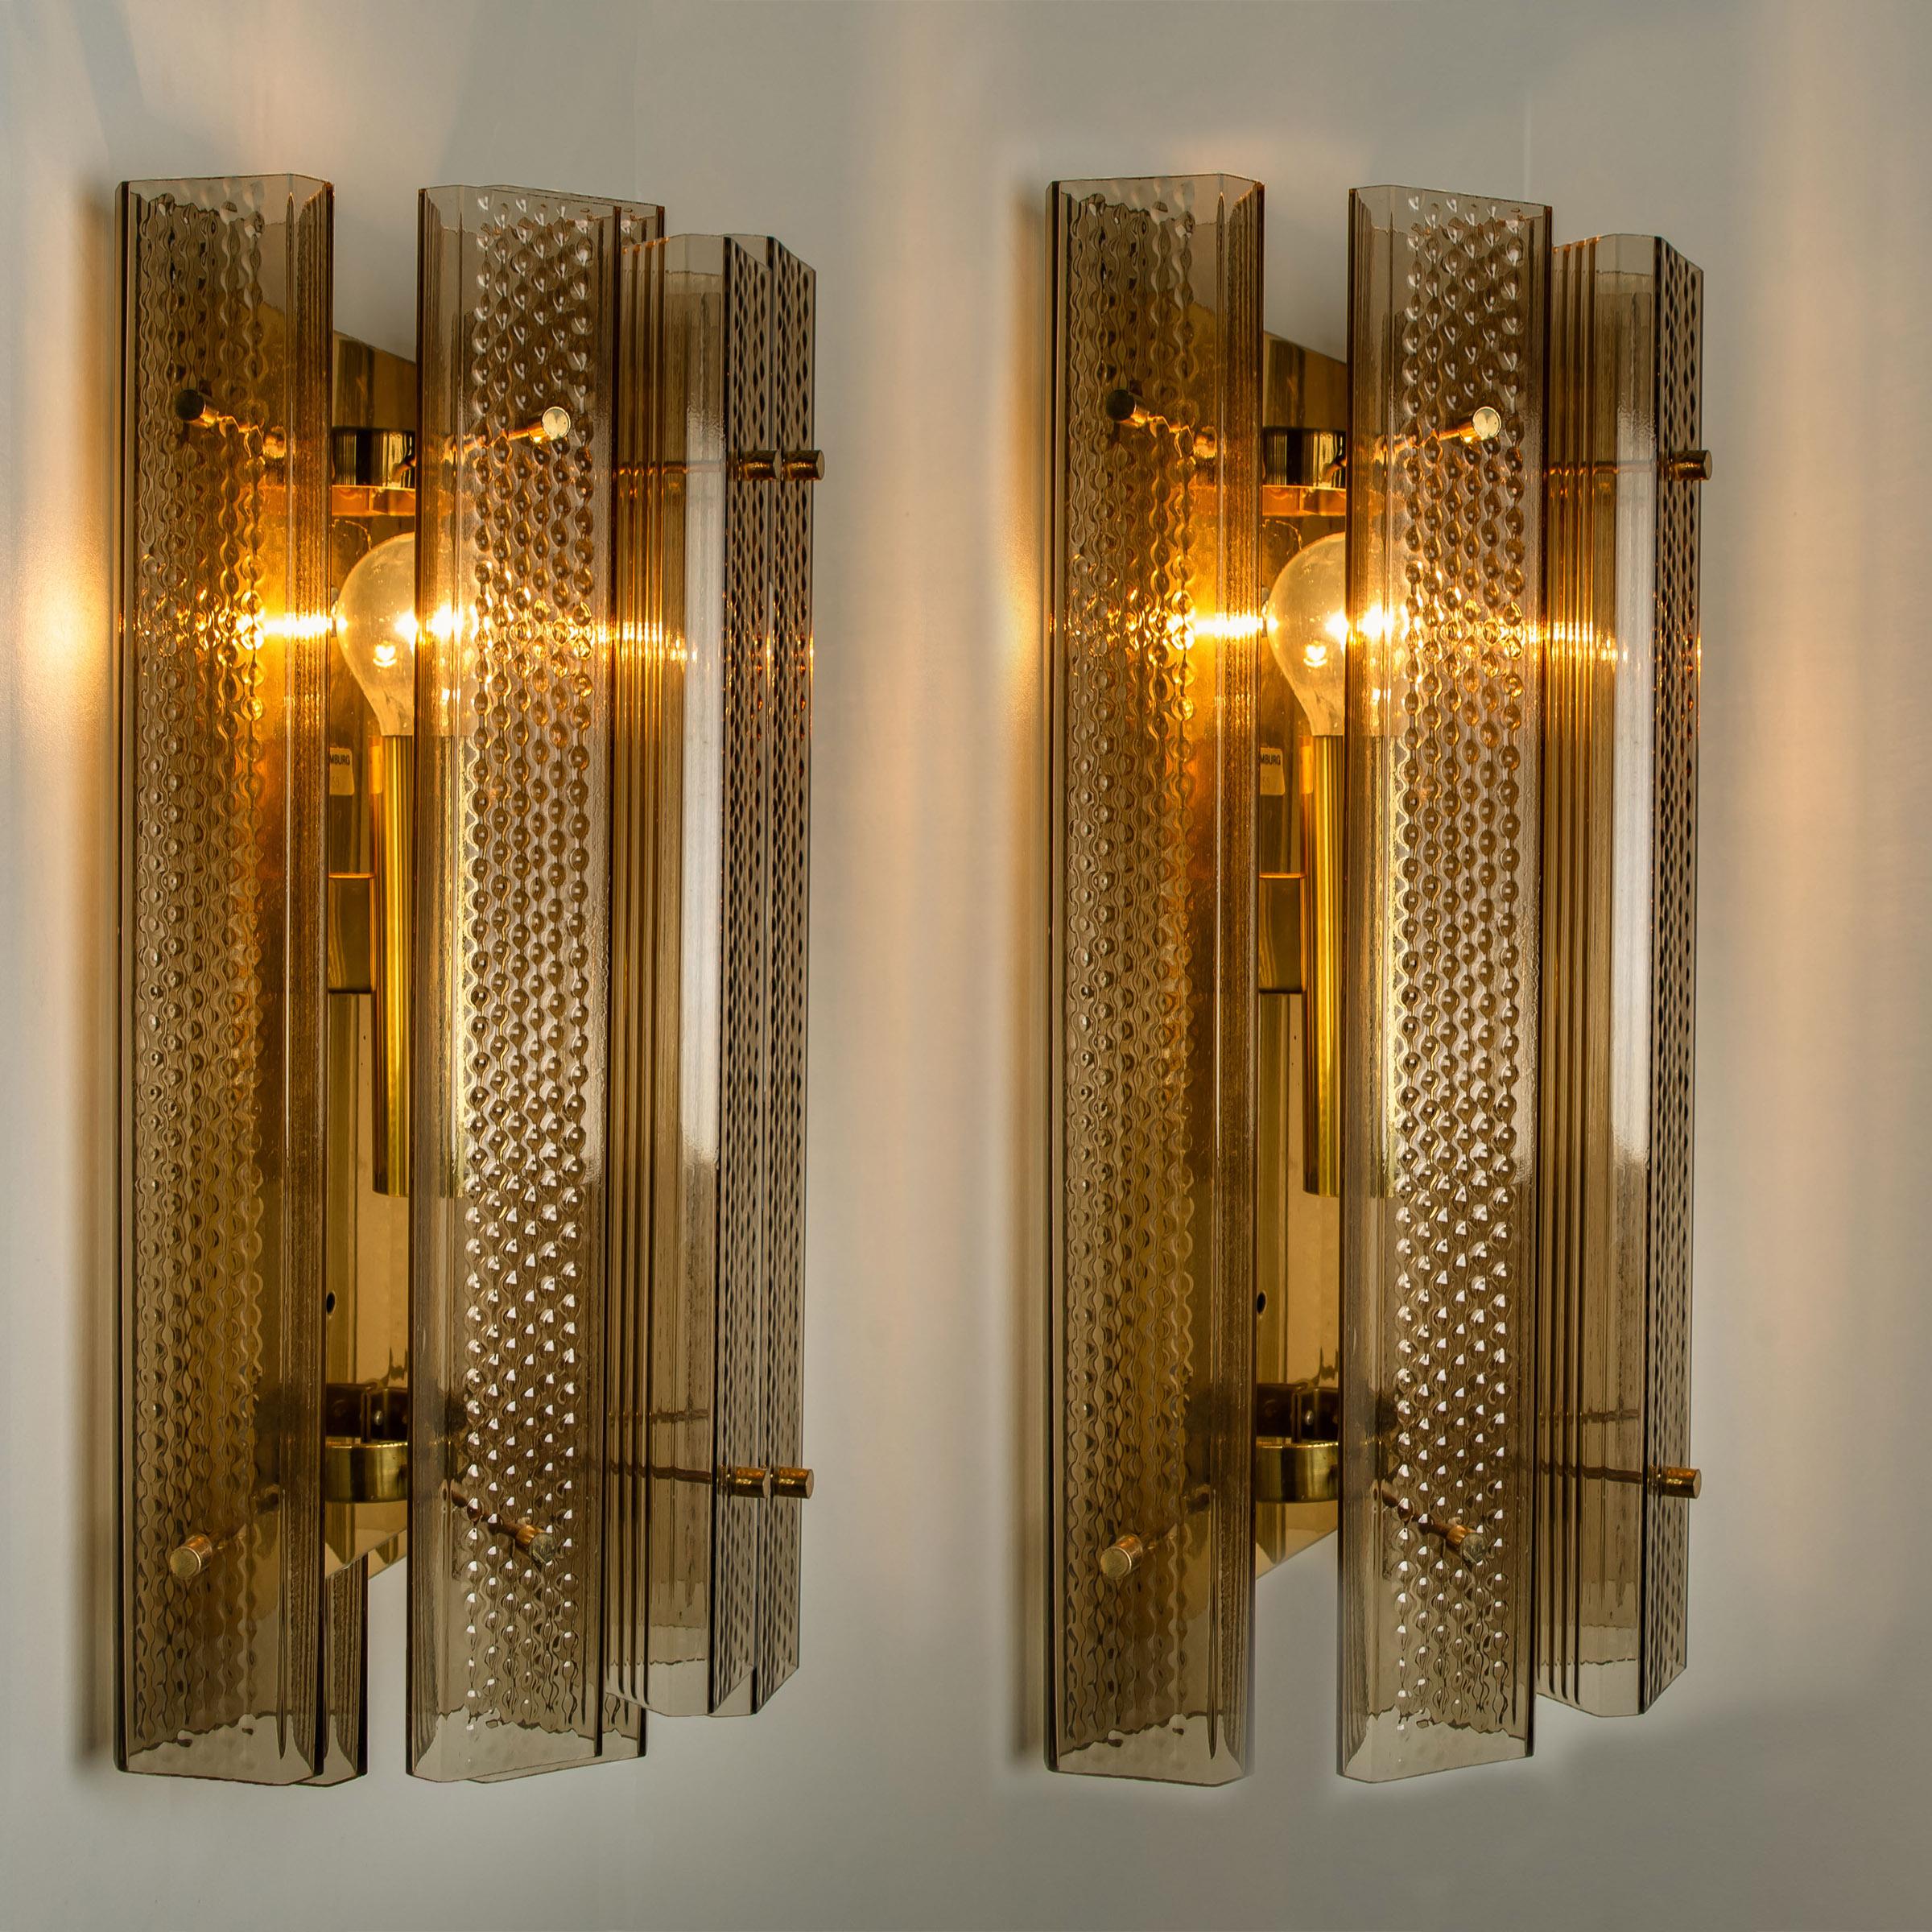 Mid-Century Modern 1 of the 3 Pairs of Extra Large Murano Wall Sconces/Wall Lights Glass and Brass For Sale